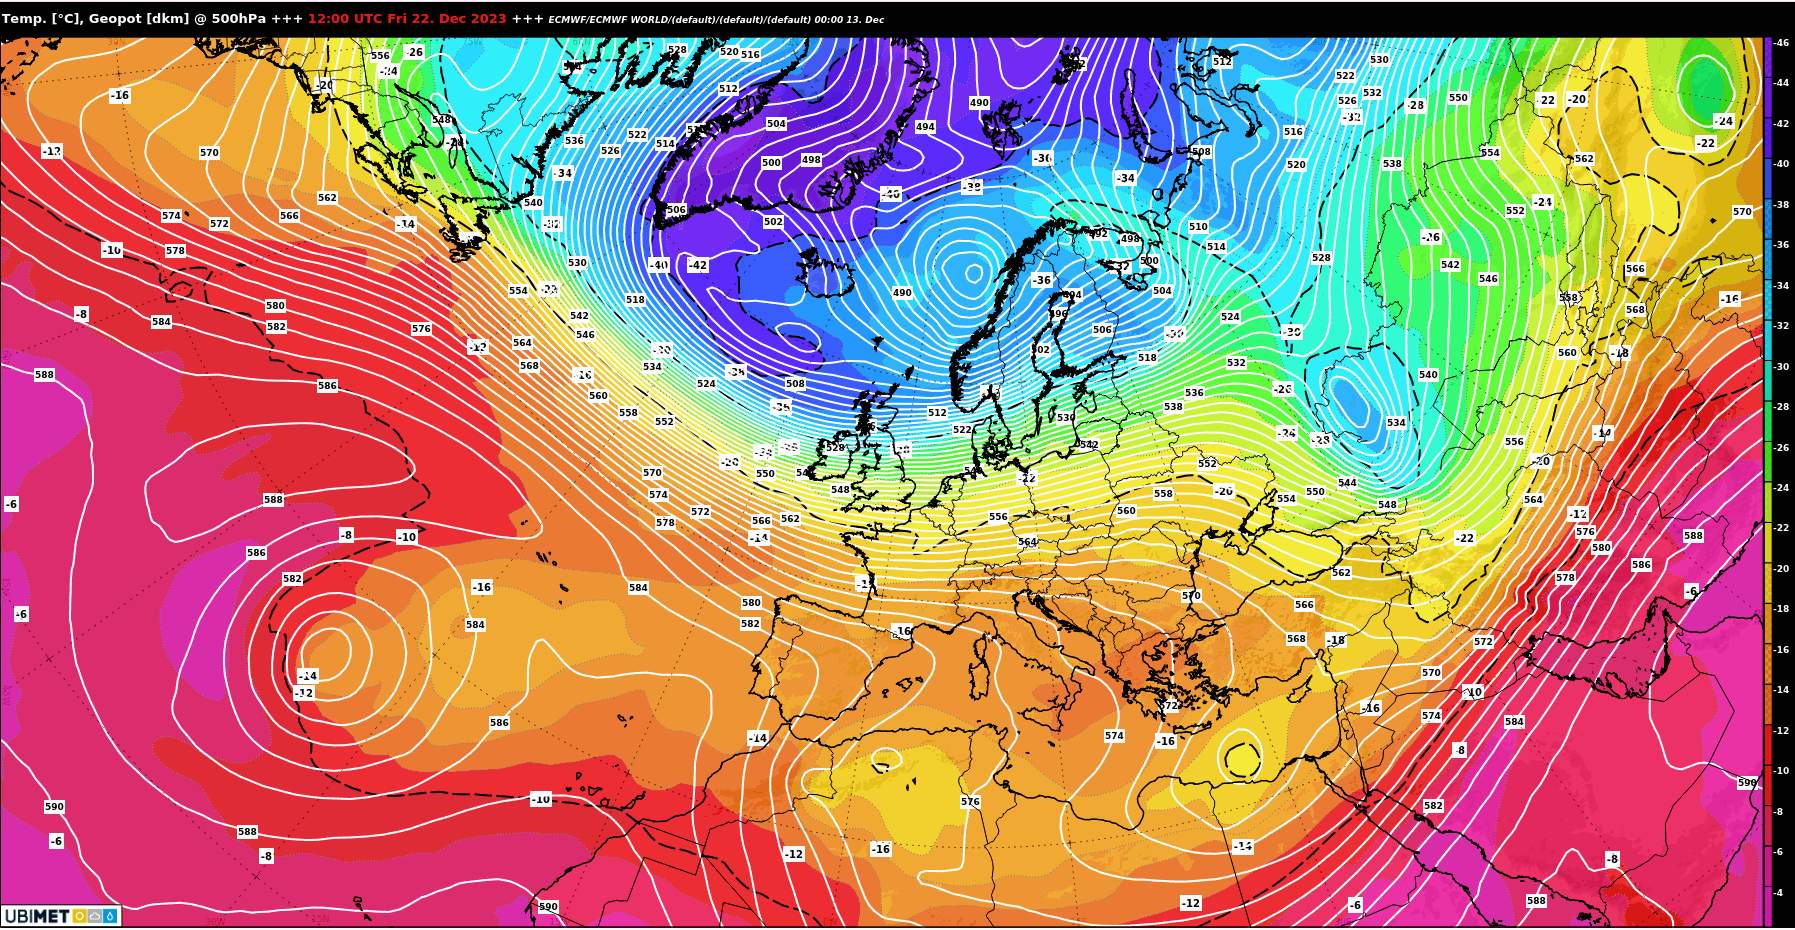 Fig. 1: Westerly position on the southern edge of a low over Scandinavia over the Alpine region on the Friday before Christmas; Source: MeteoNews, UBIMET